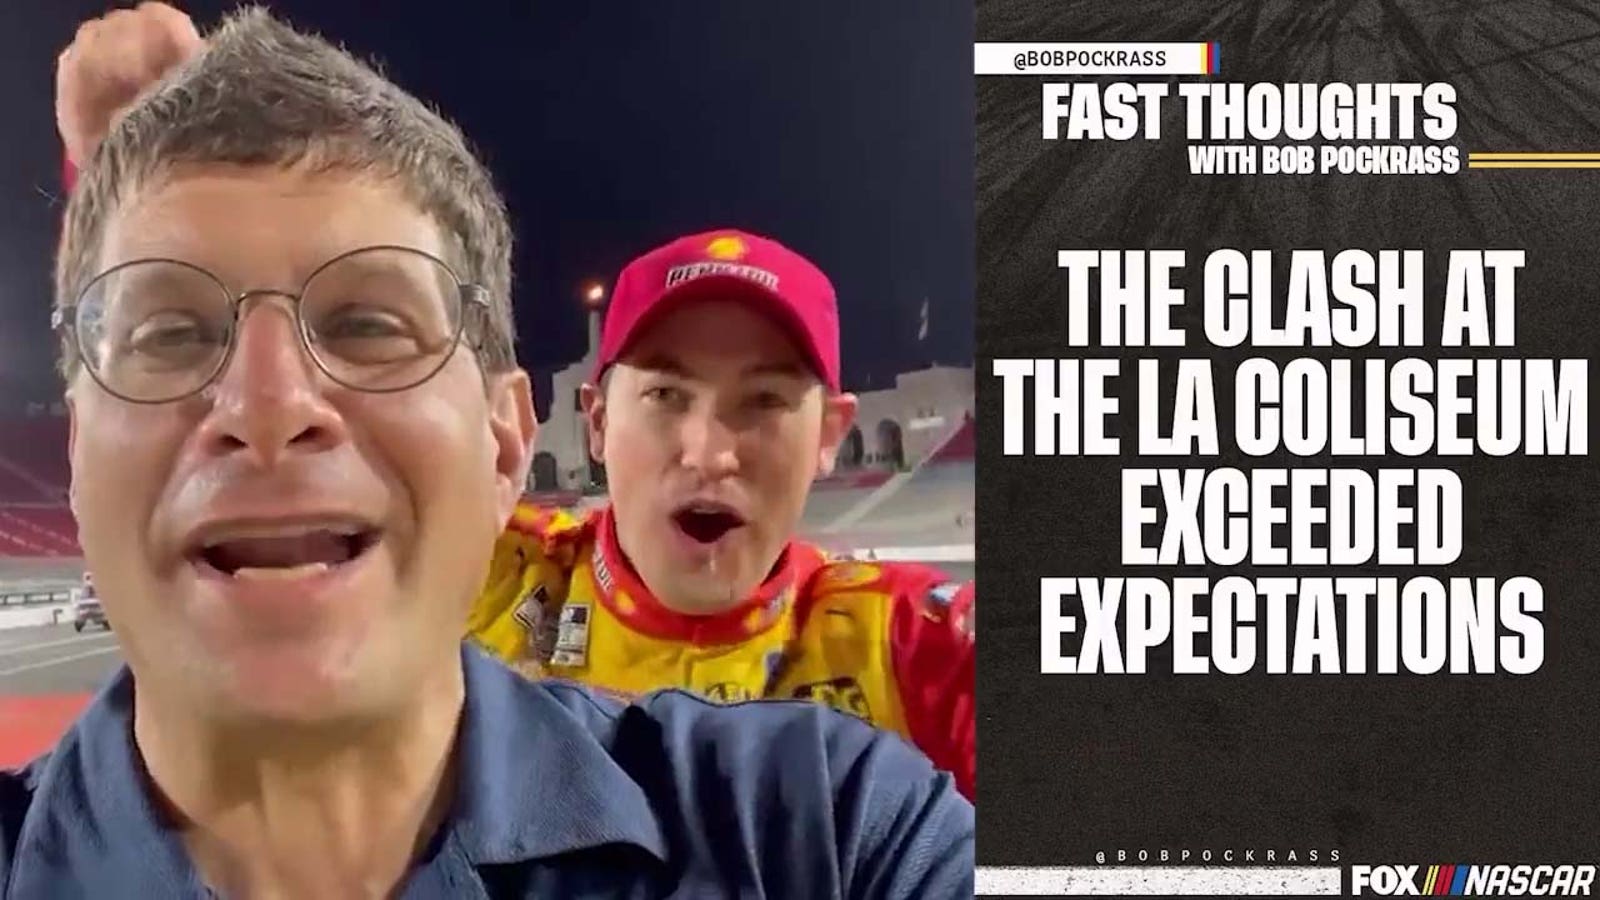 'It exceeded expectations' — Bob Pockrass on The Clash at the Coliseum